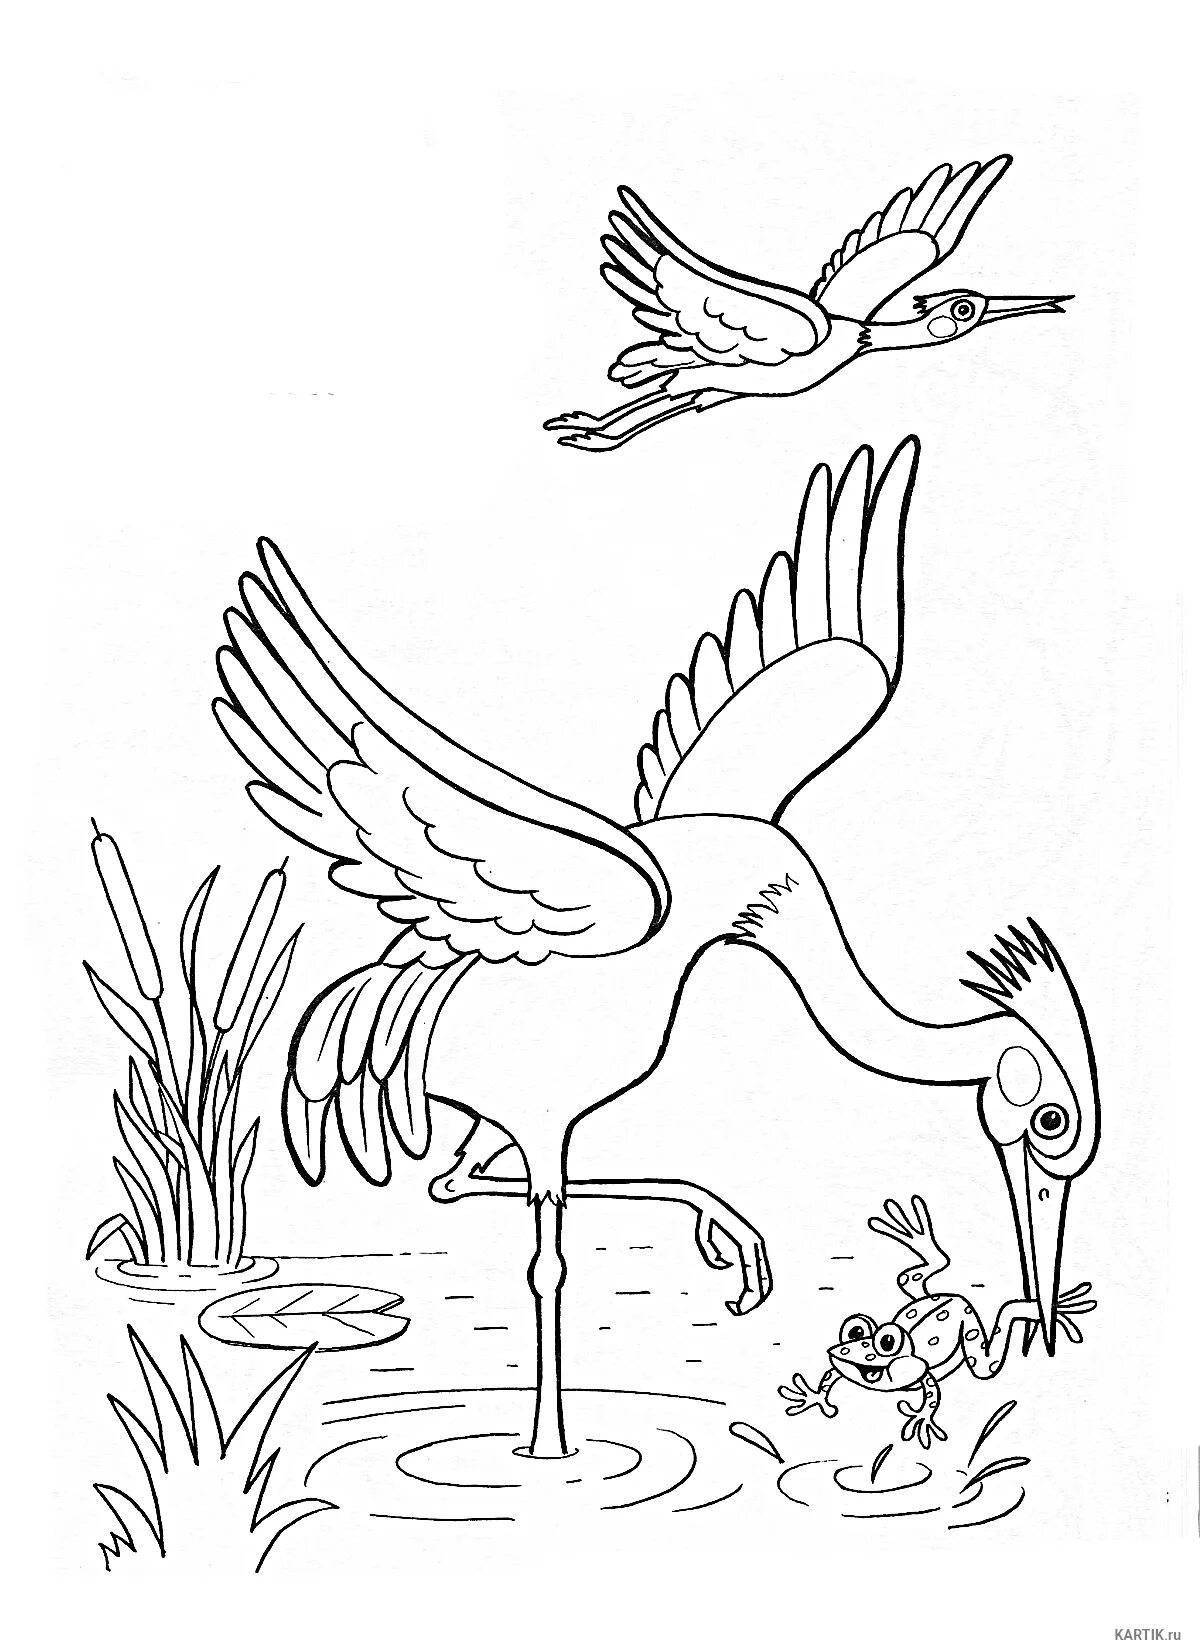 Majestic heron coloring page